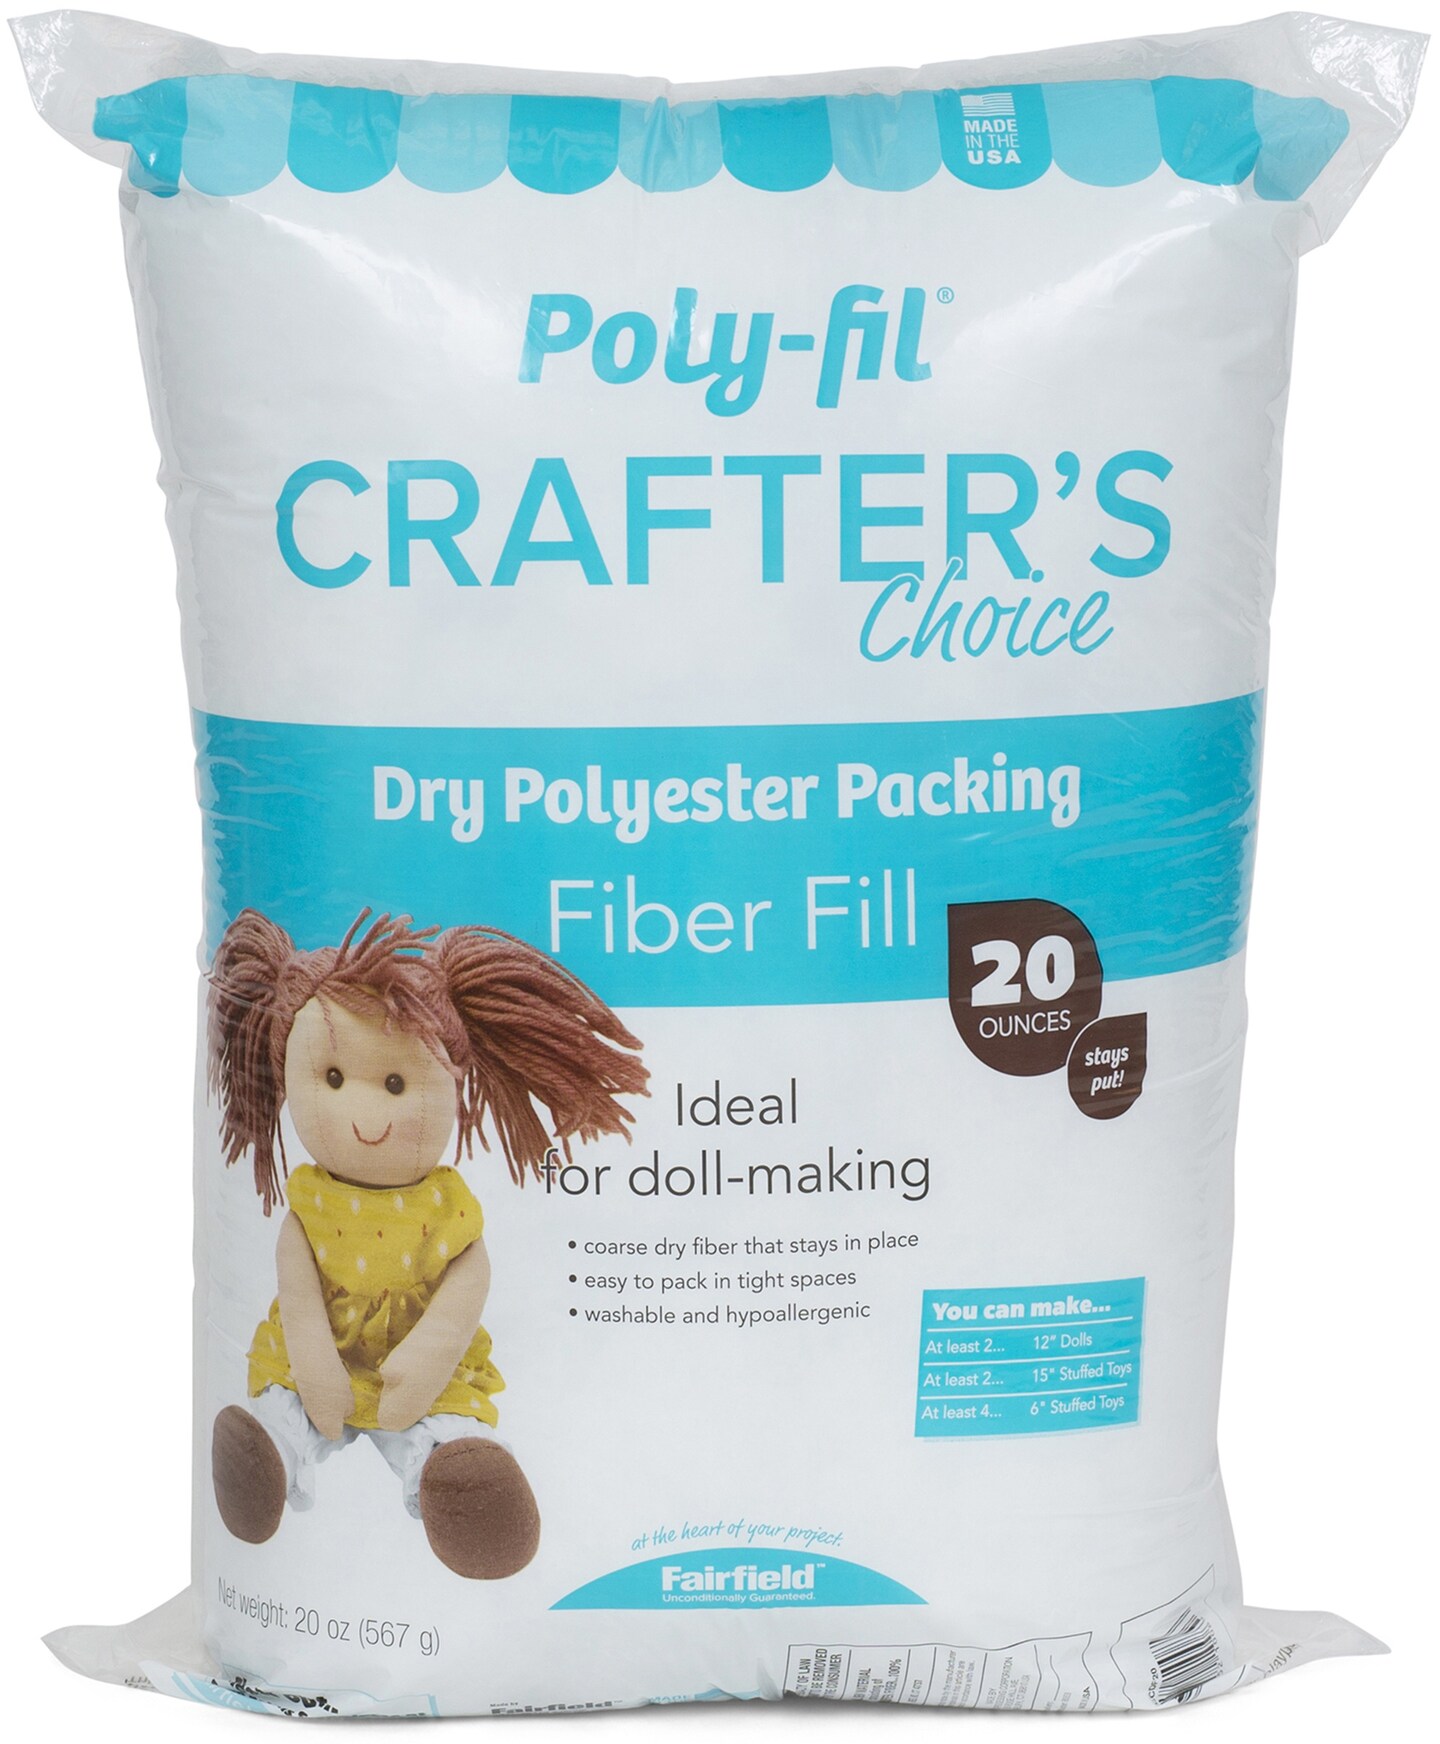  Essentials by Leisure Arts Polyester Fiber-Fil, Premium  Fiber-Fil Stuffing, 12oz Bag, High Resilience Polyfill for Filling Stuffed  Animals, Crafts, Pillow Stuffing, Cushion Stuffing : Arts, Crafts & Sewing